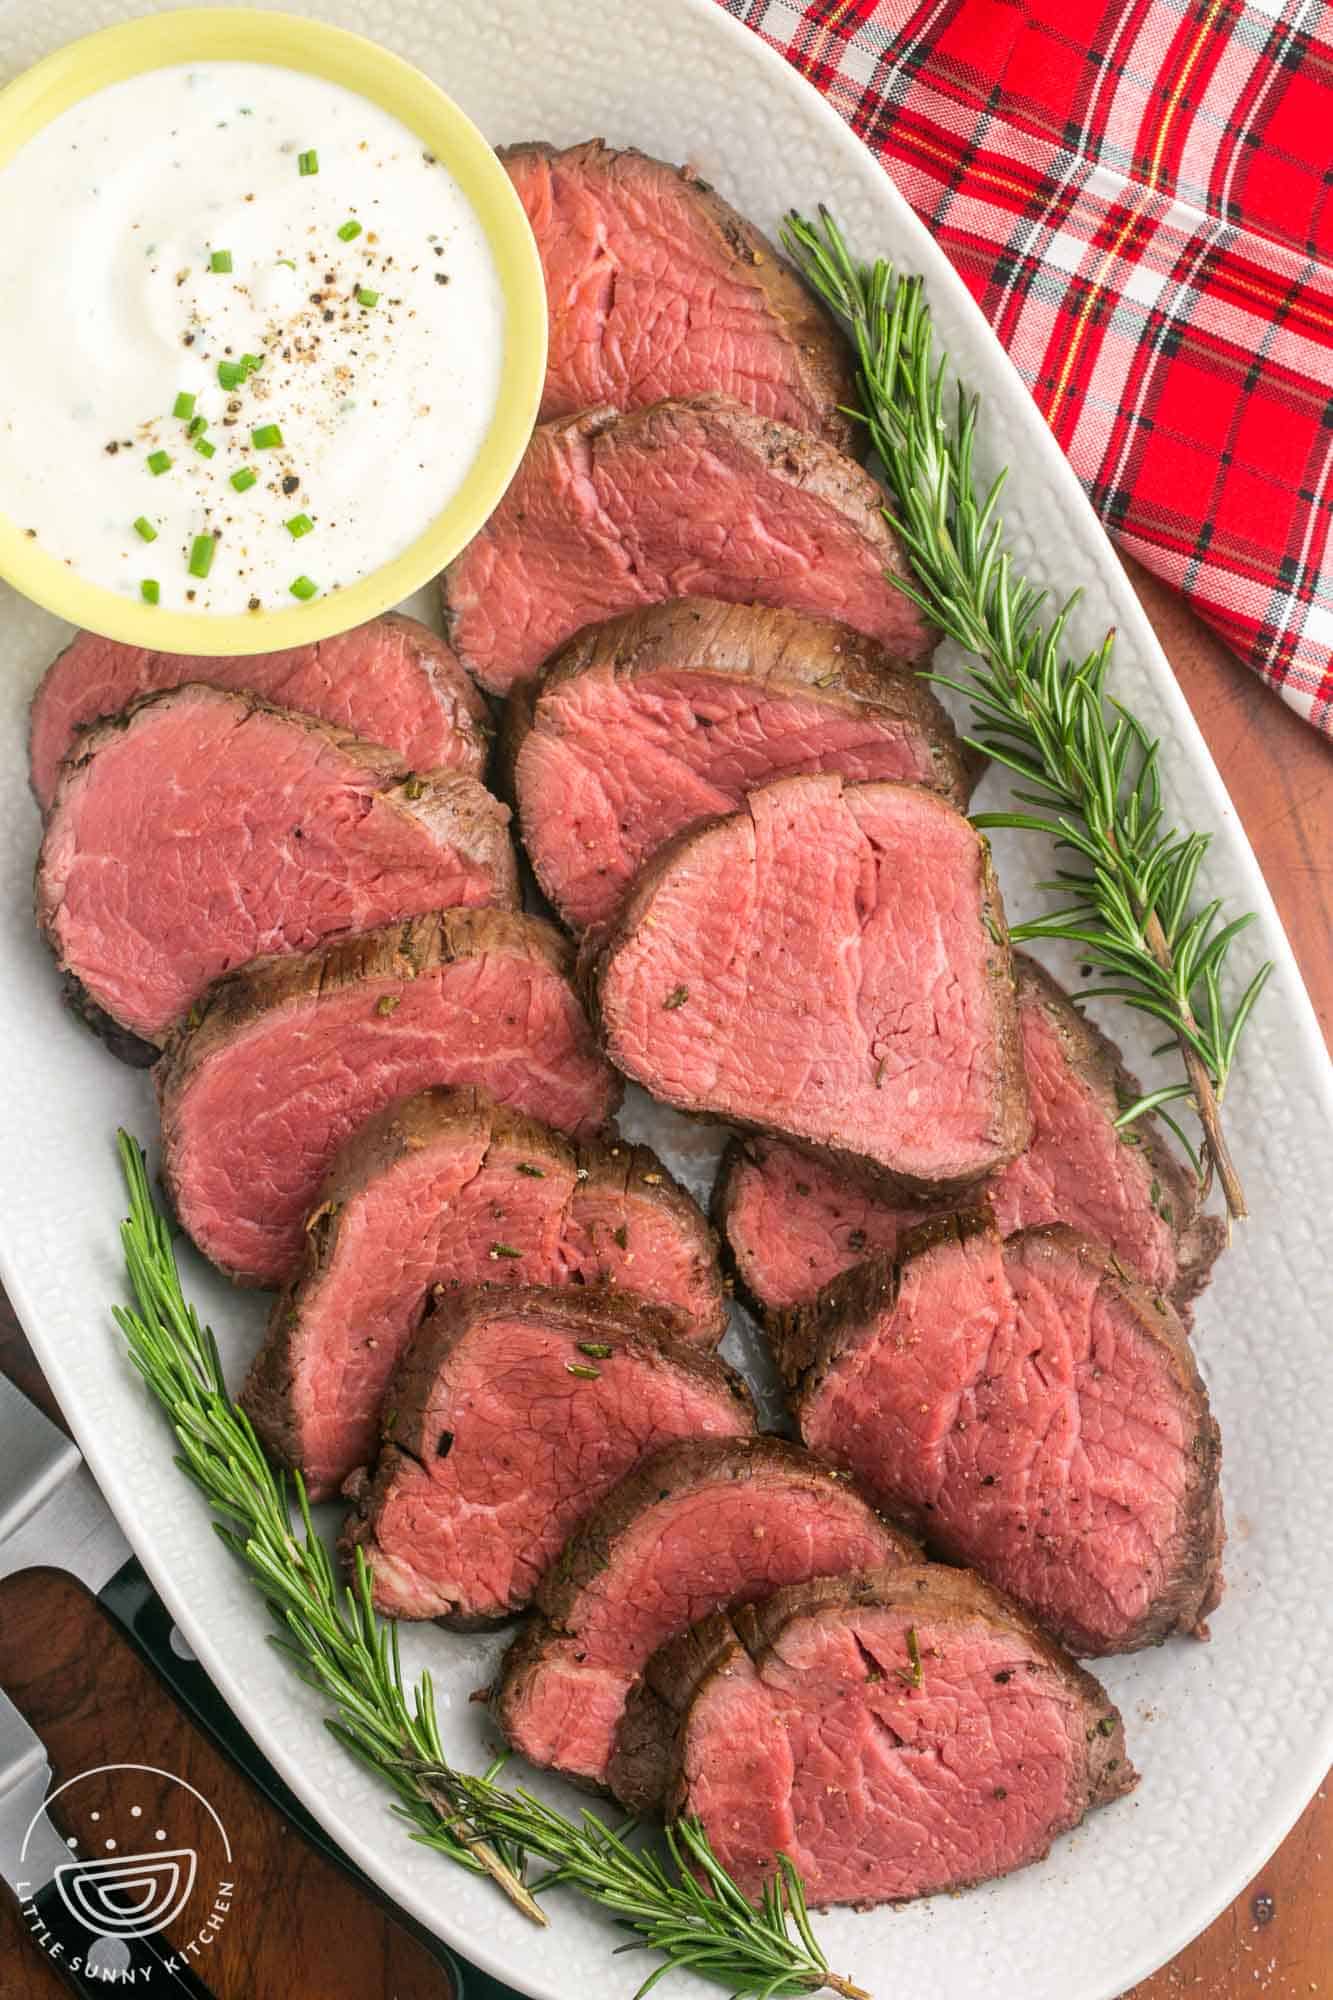 Large oval platter with beef tenderloin slices, and a bowl of horseradish sauce